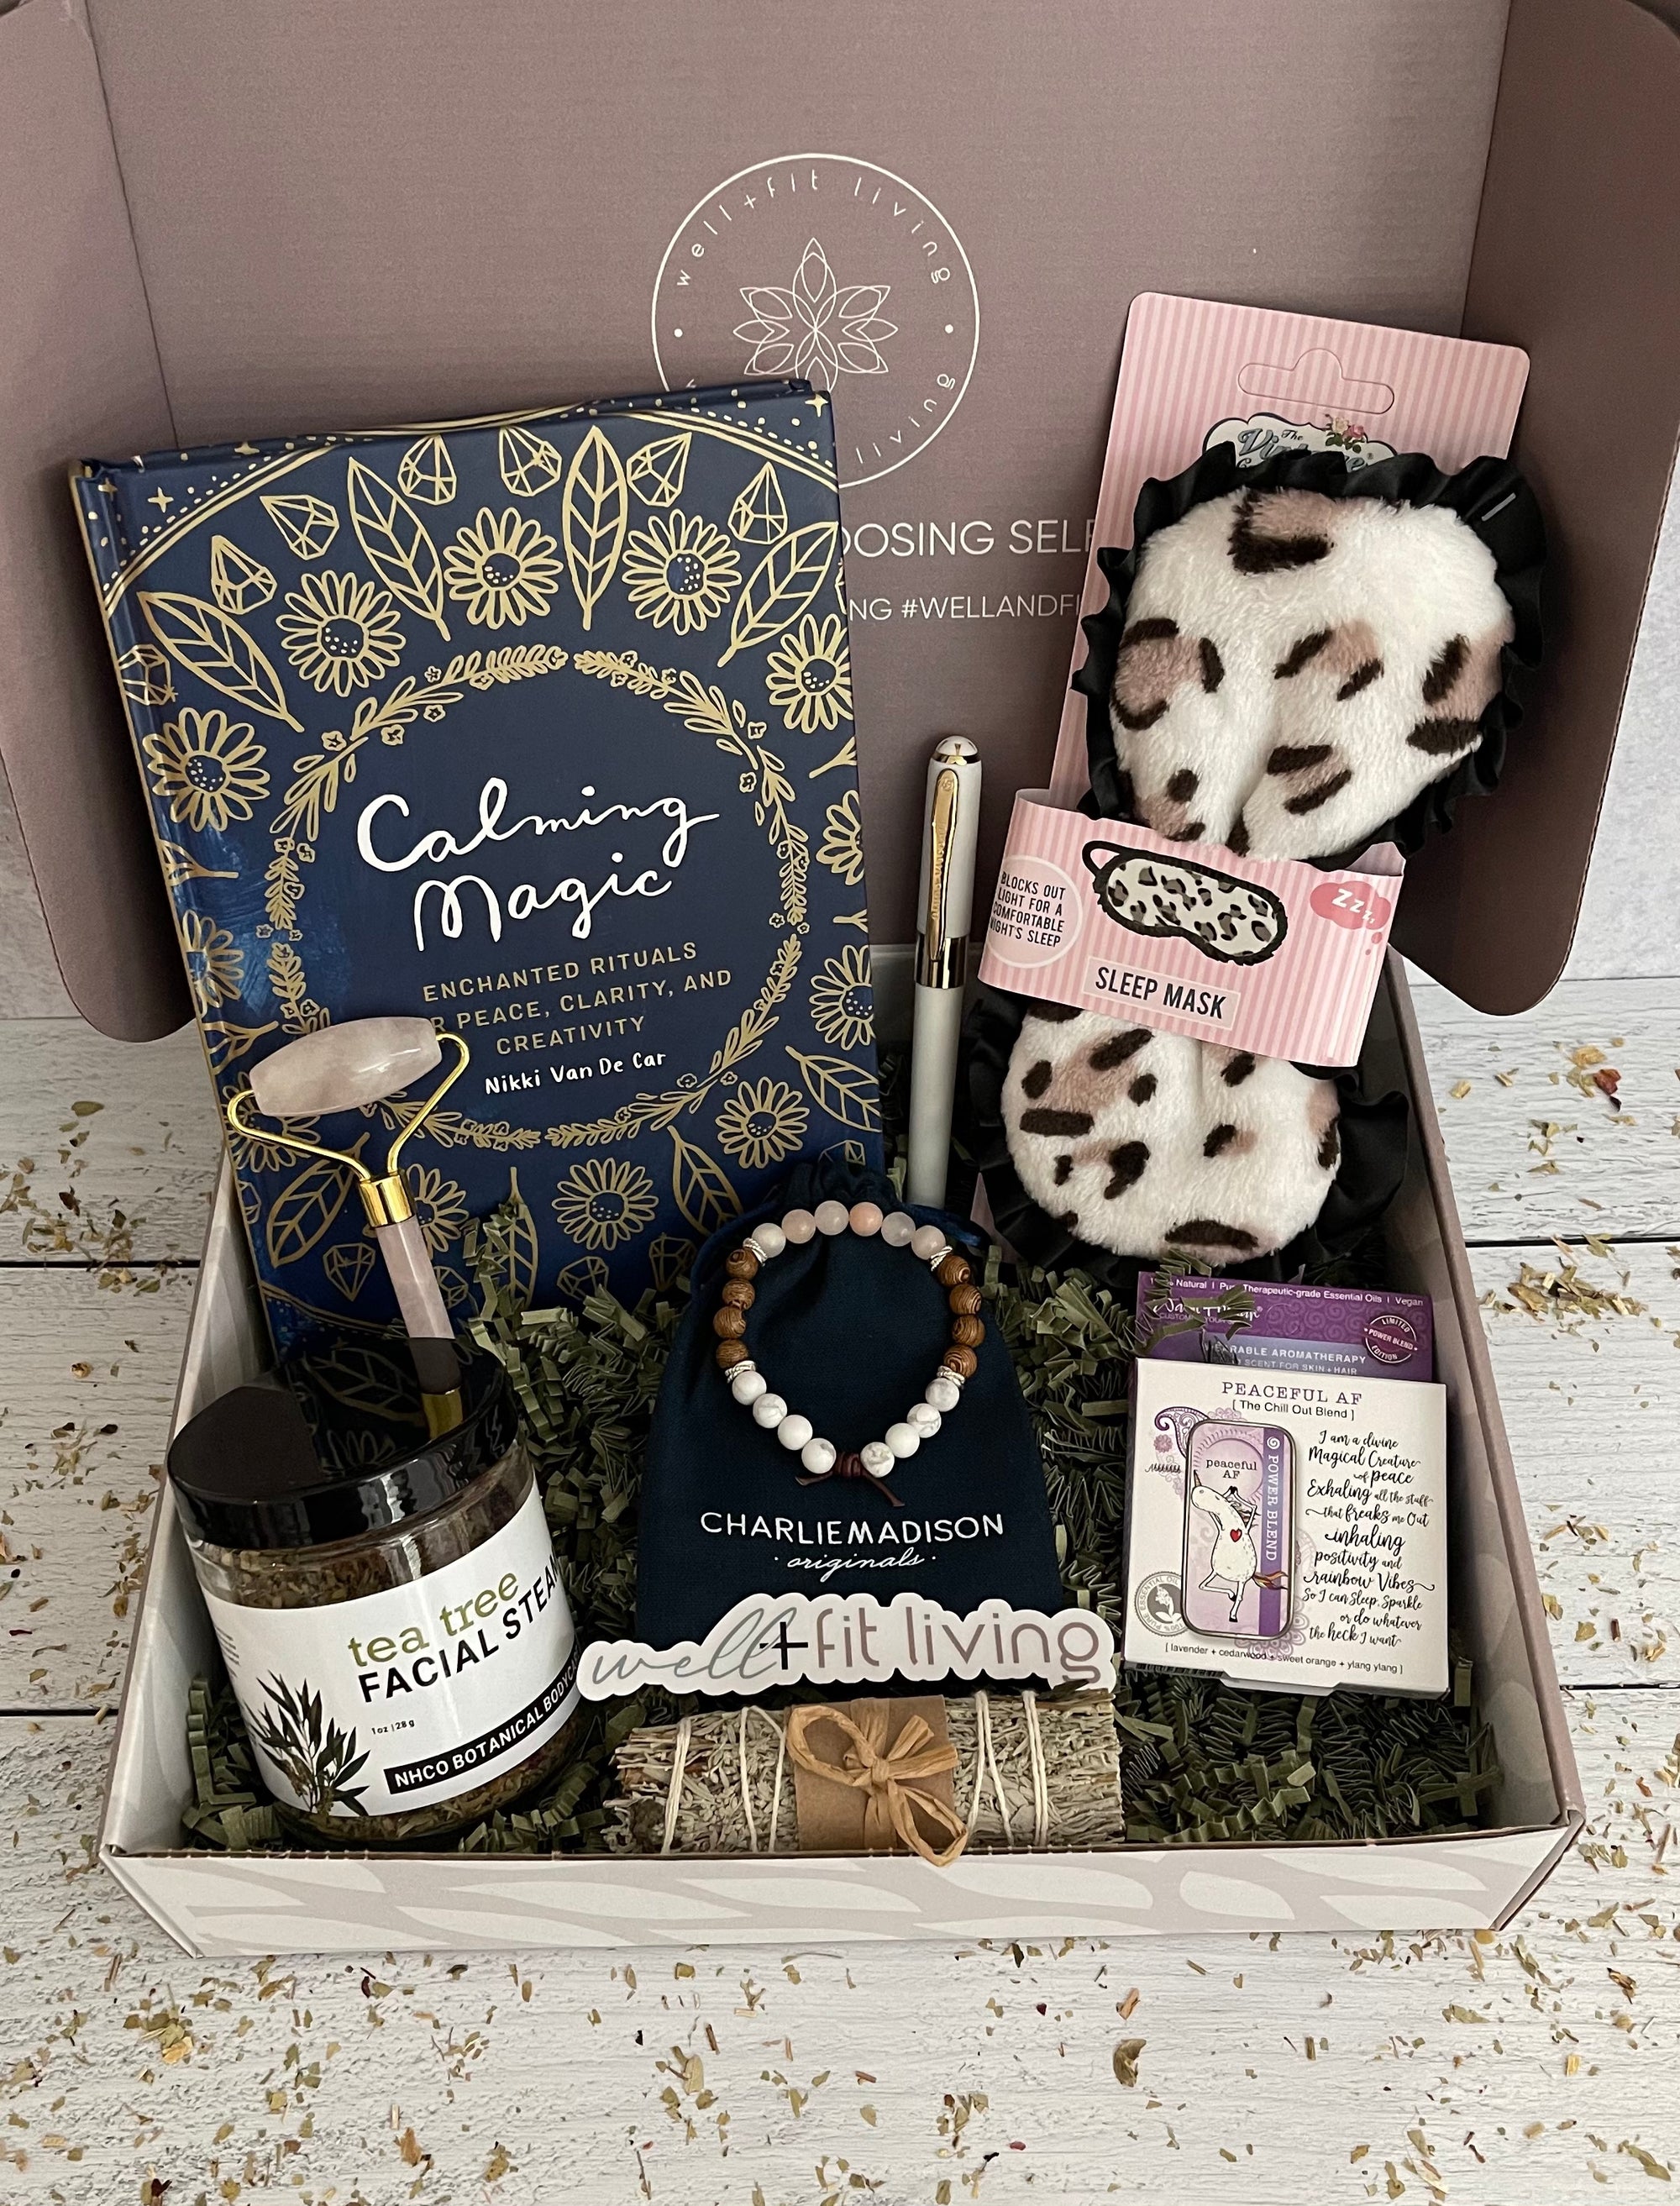 Self-Care & Wellness Box One Time Purchase